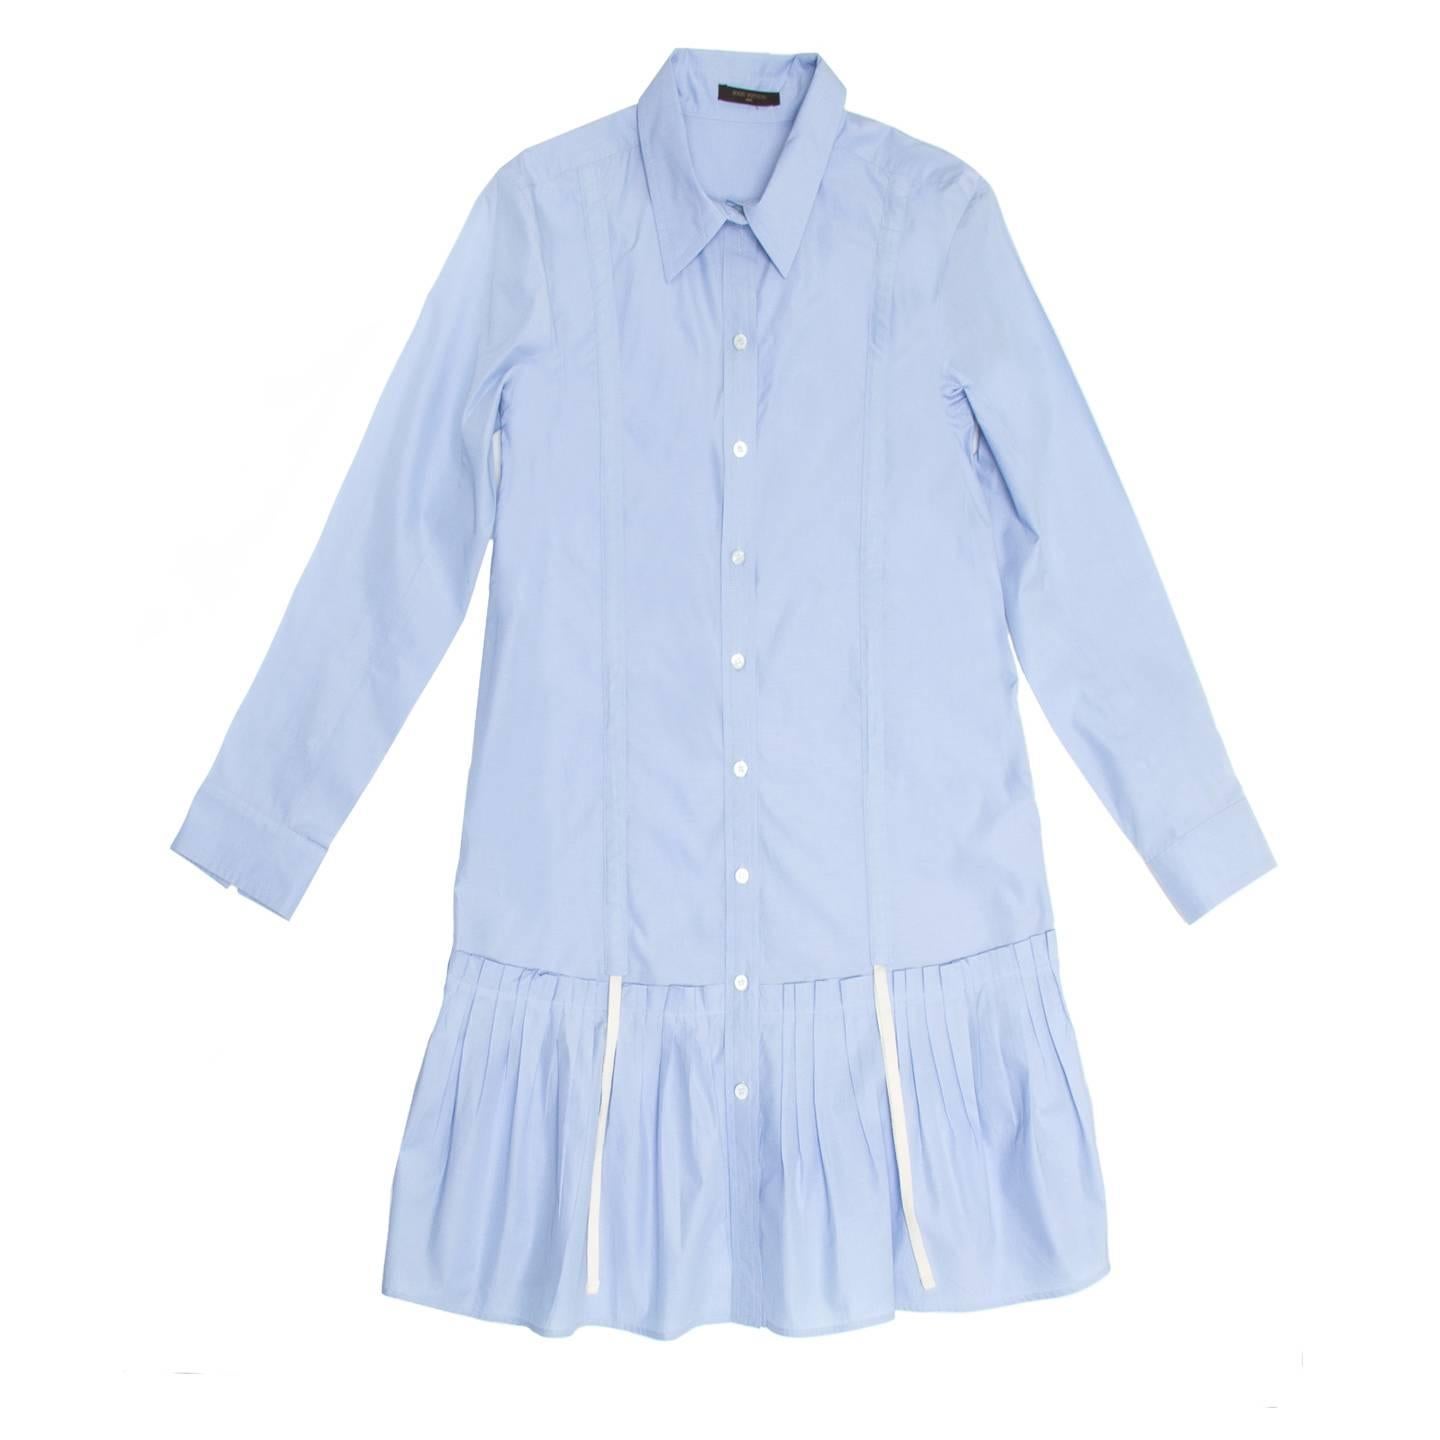 Sky blue cotton knee length shirt dress with a pleated drop waist skirt part. The fit is straight and the front opens from neck to hem, the collar is pointed peter pan style and the sleeves are long. Drawstring detail enrich the side seams and front